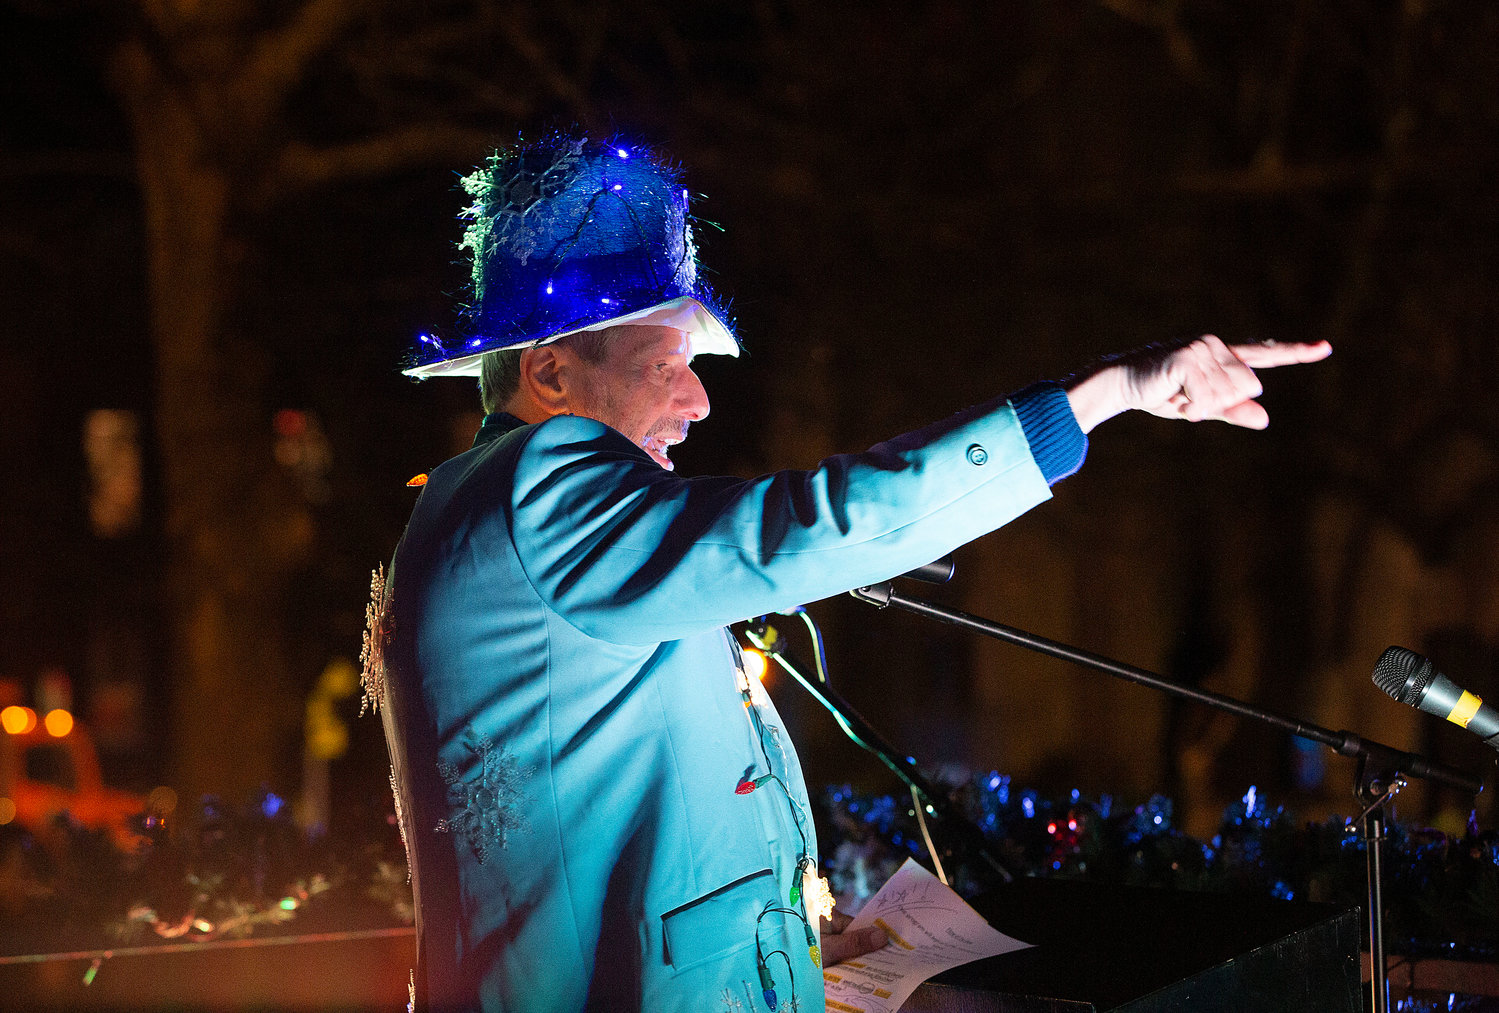 Tony Morettini, sporting a stylish and crisp Jack Frost outfit complete with lights, was the MC for the event.